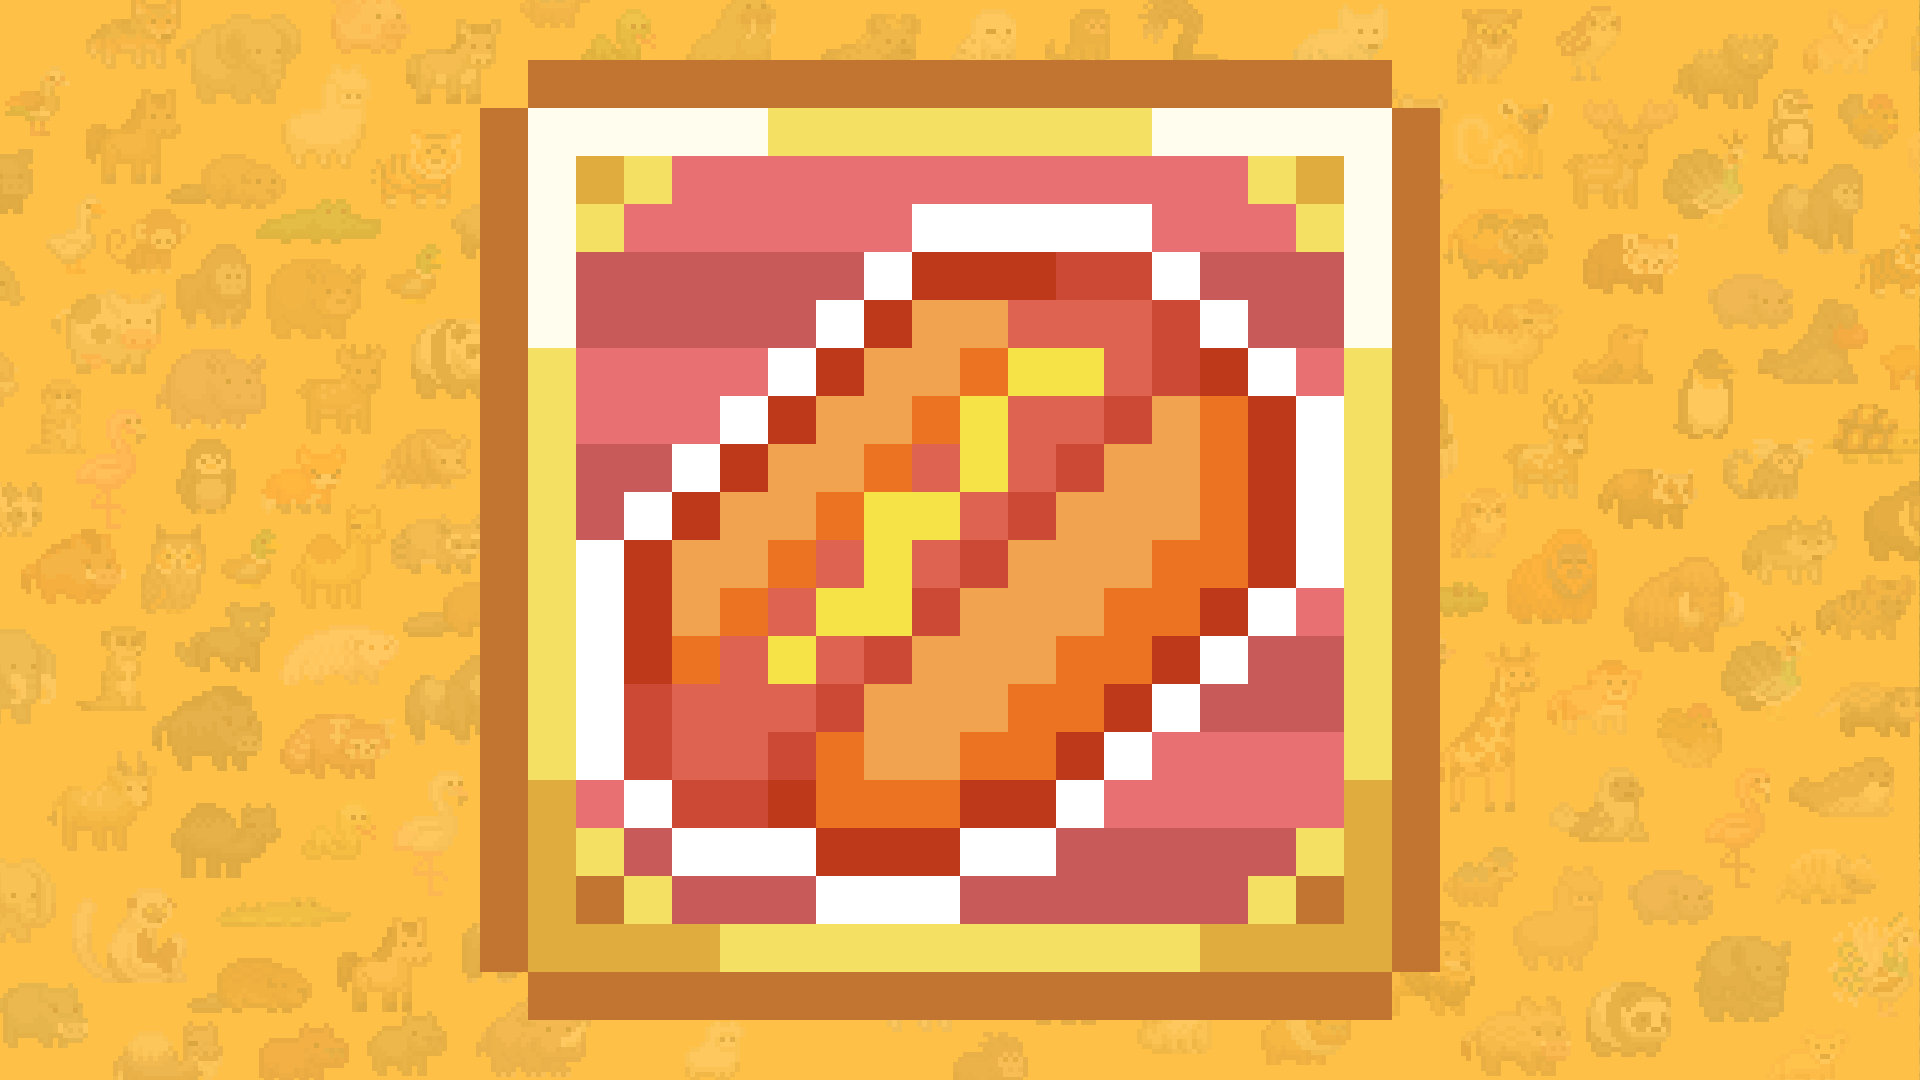 Icon for Bad Hot Dog